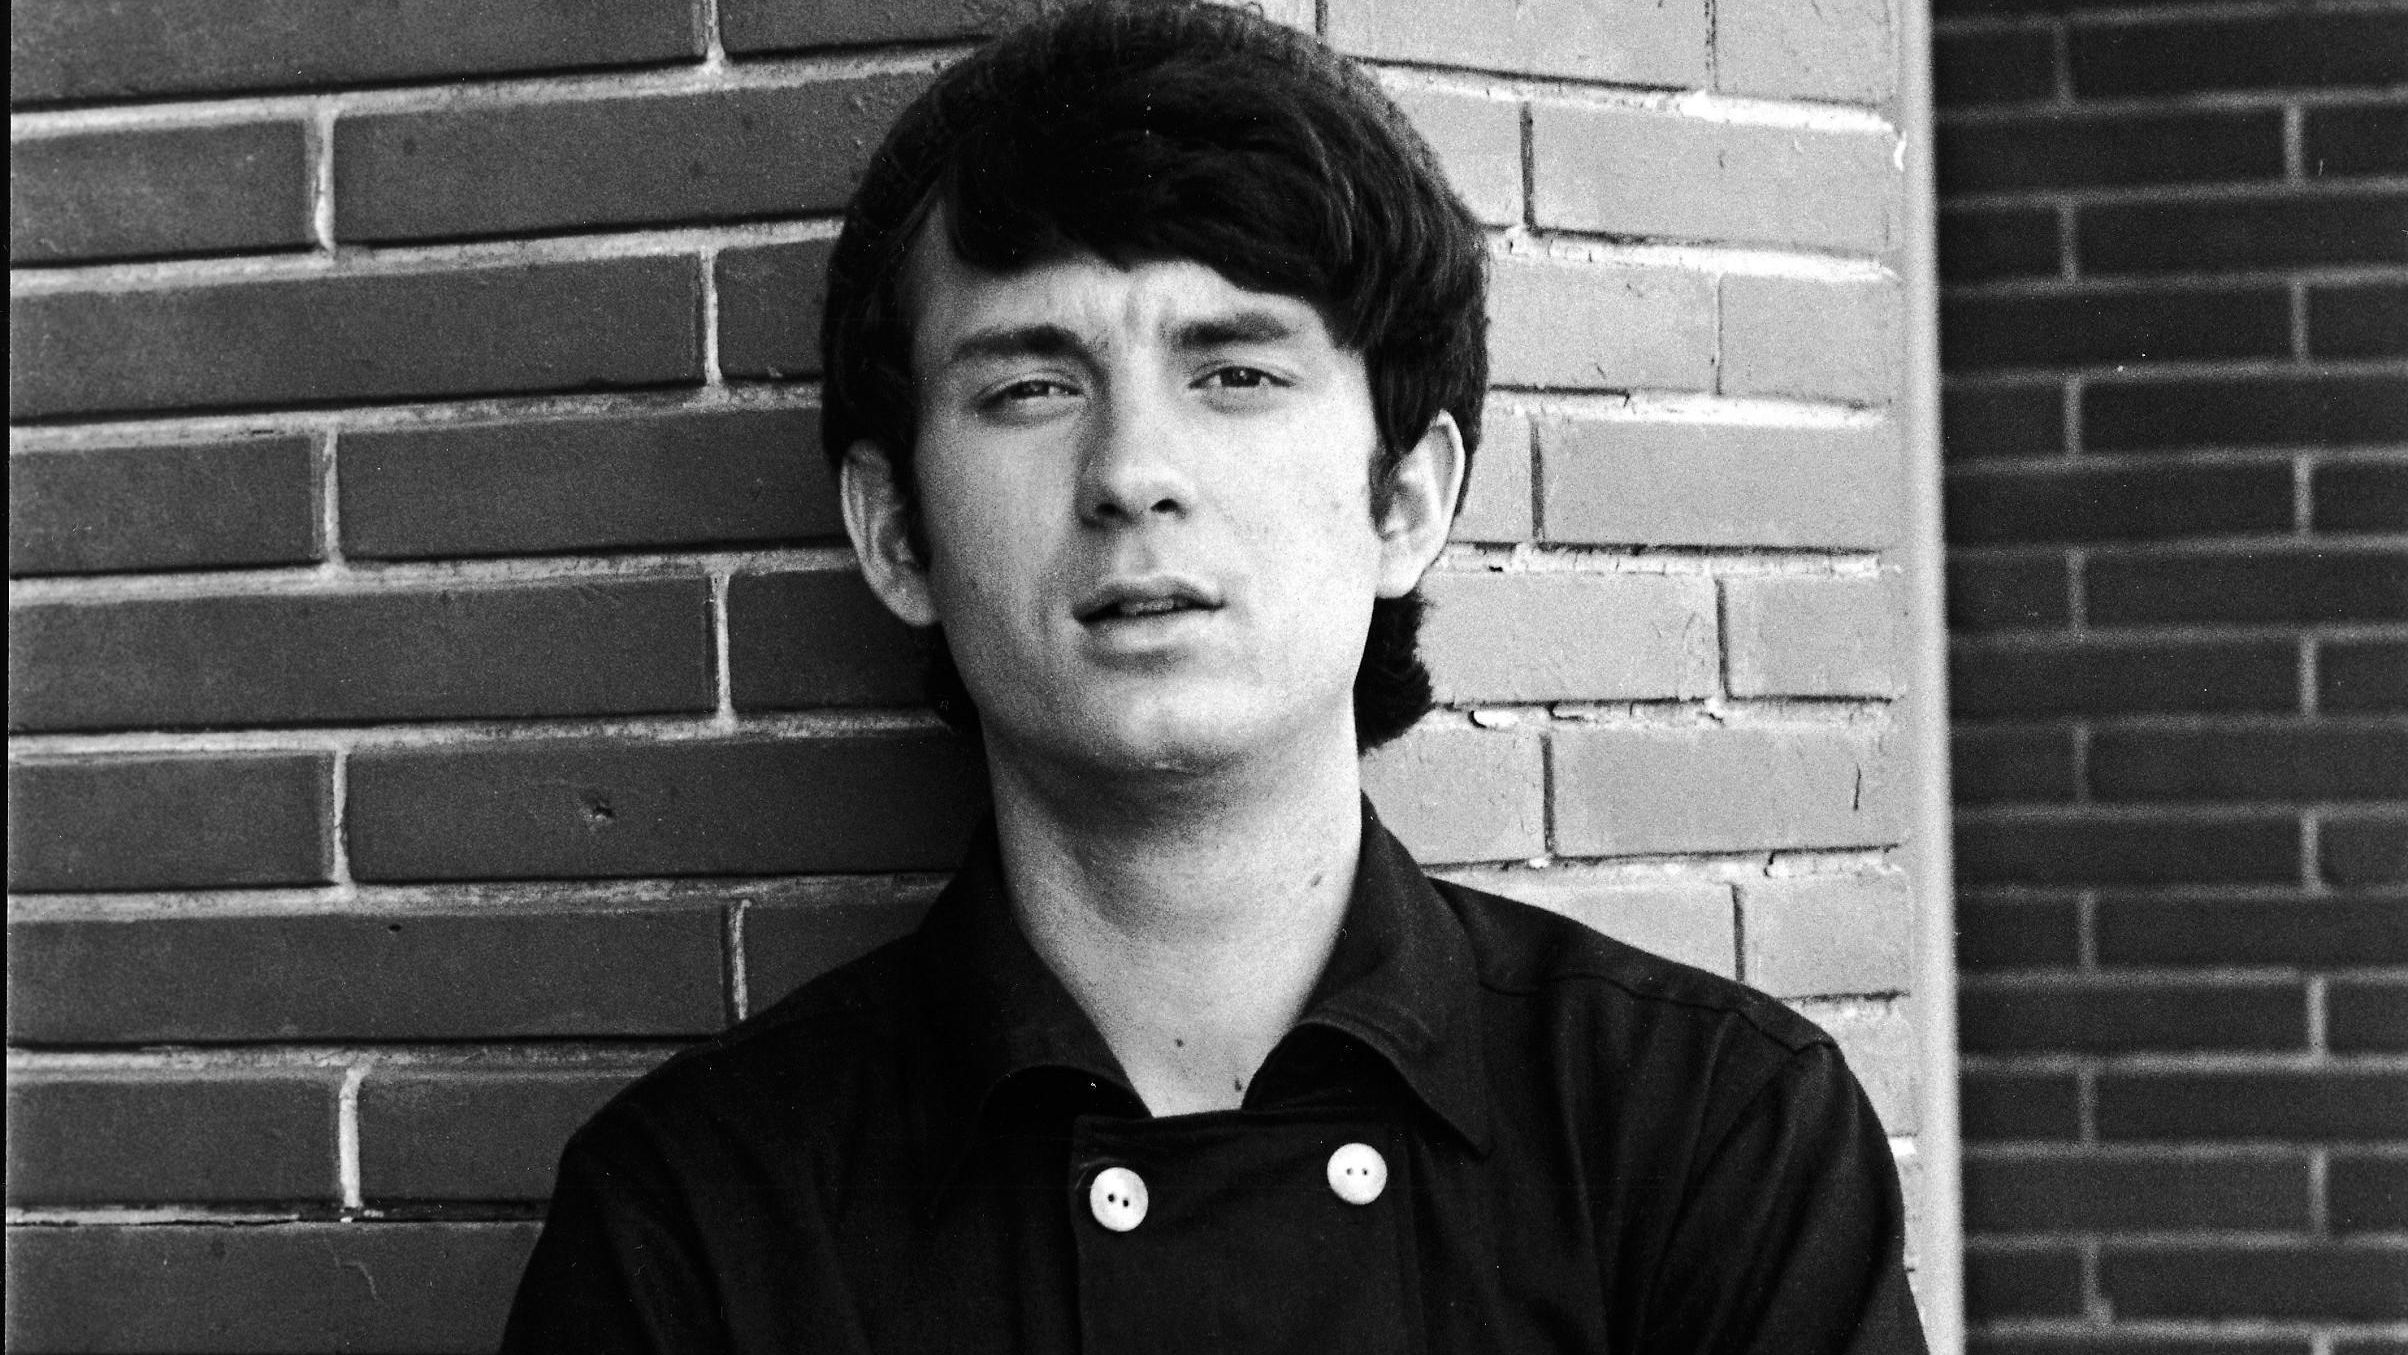 Michael Nesmith from the Monkees has died aged 78